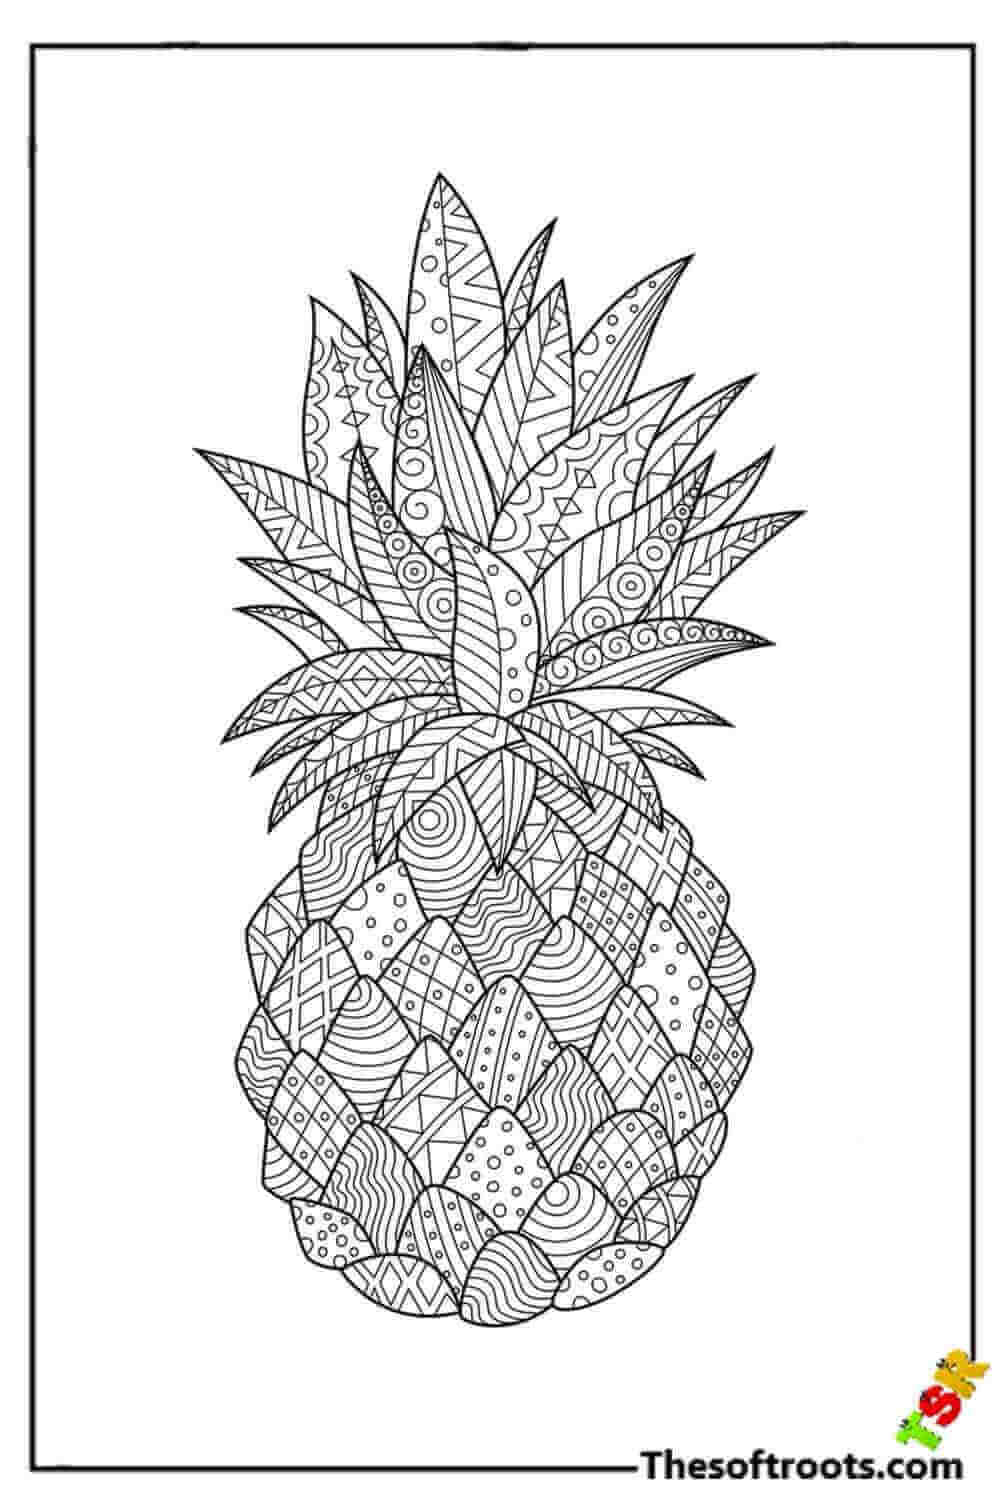 Adult Pineapple coloring pages